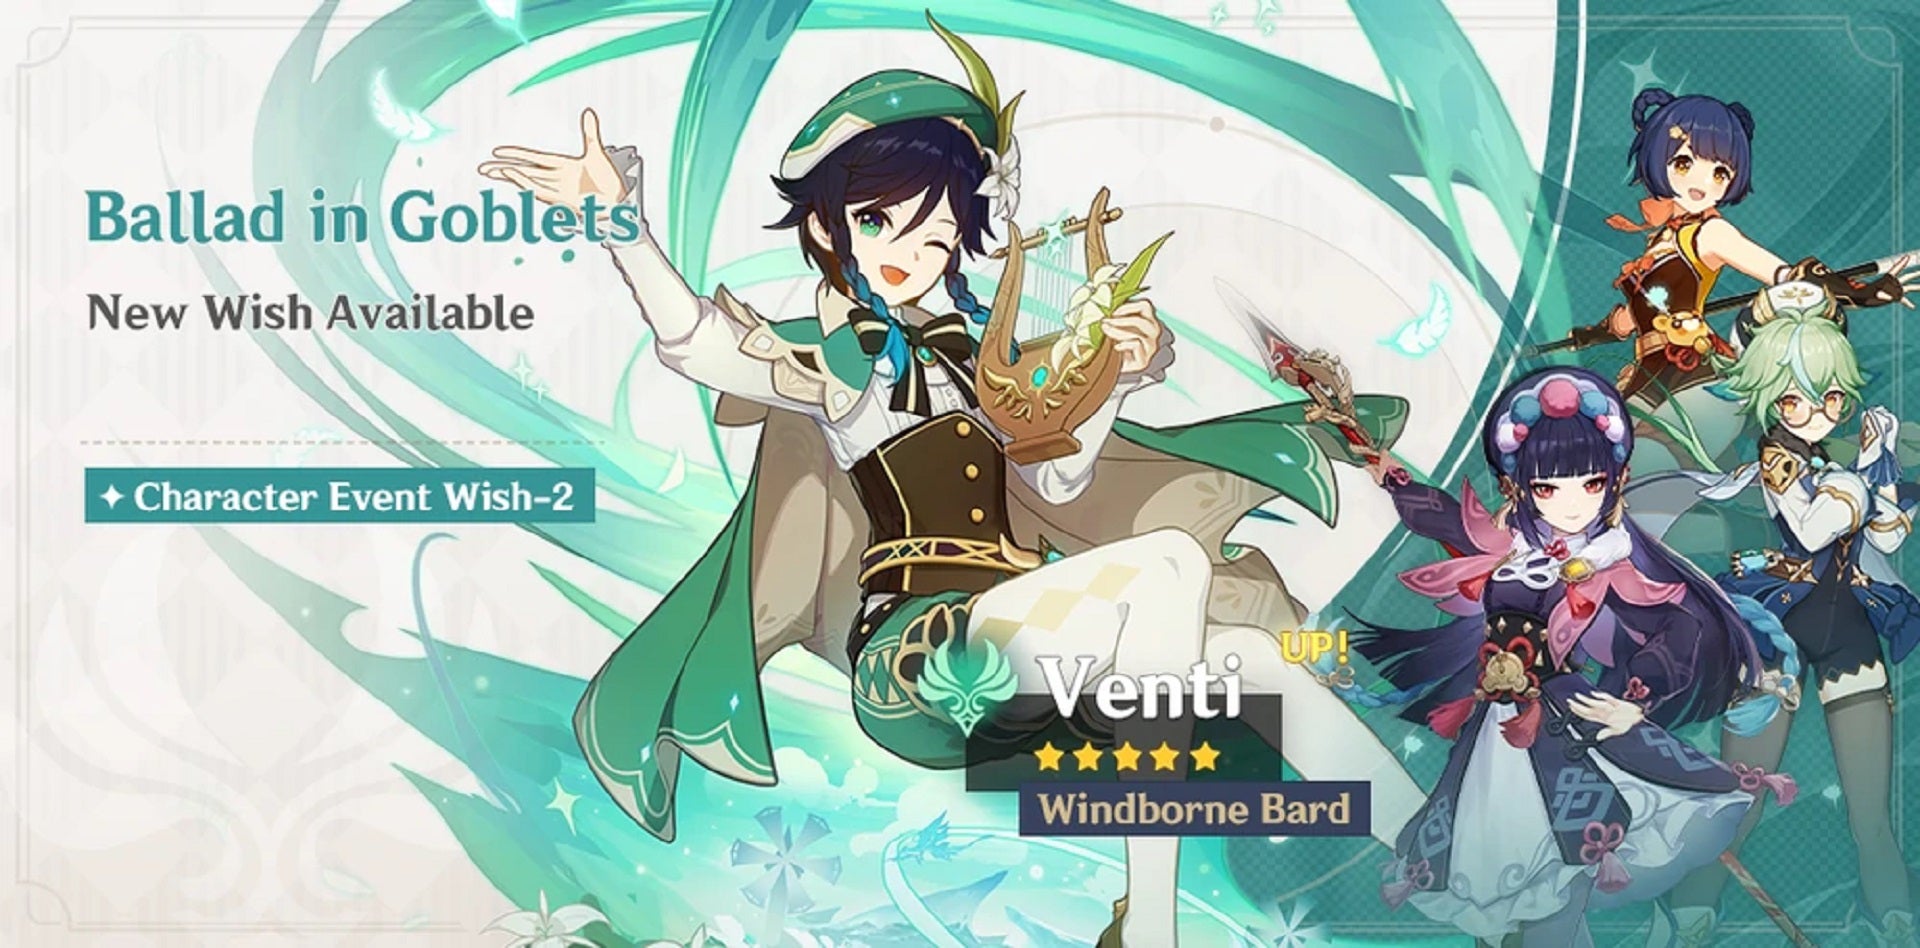 Genshin Impact's "Ballad in Goblets" banner as it appeared in March 2022, featuring Venti, Yun Jin, Xiangling, and Sucrose.